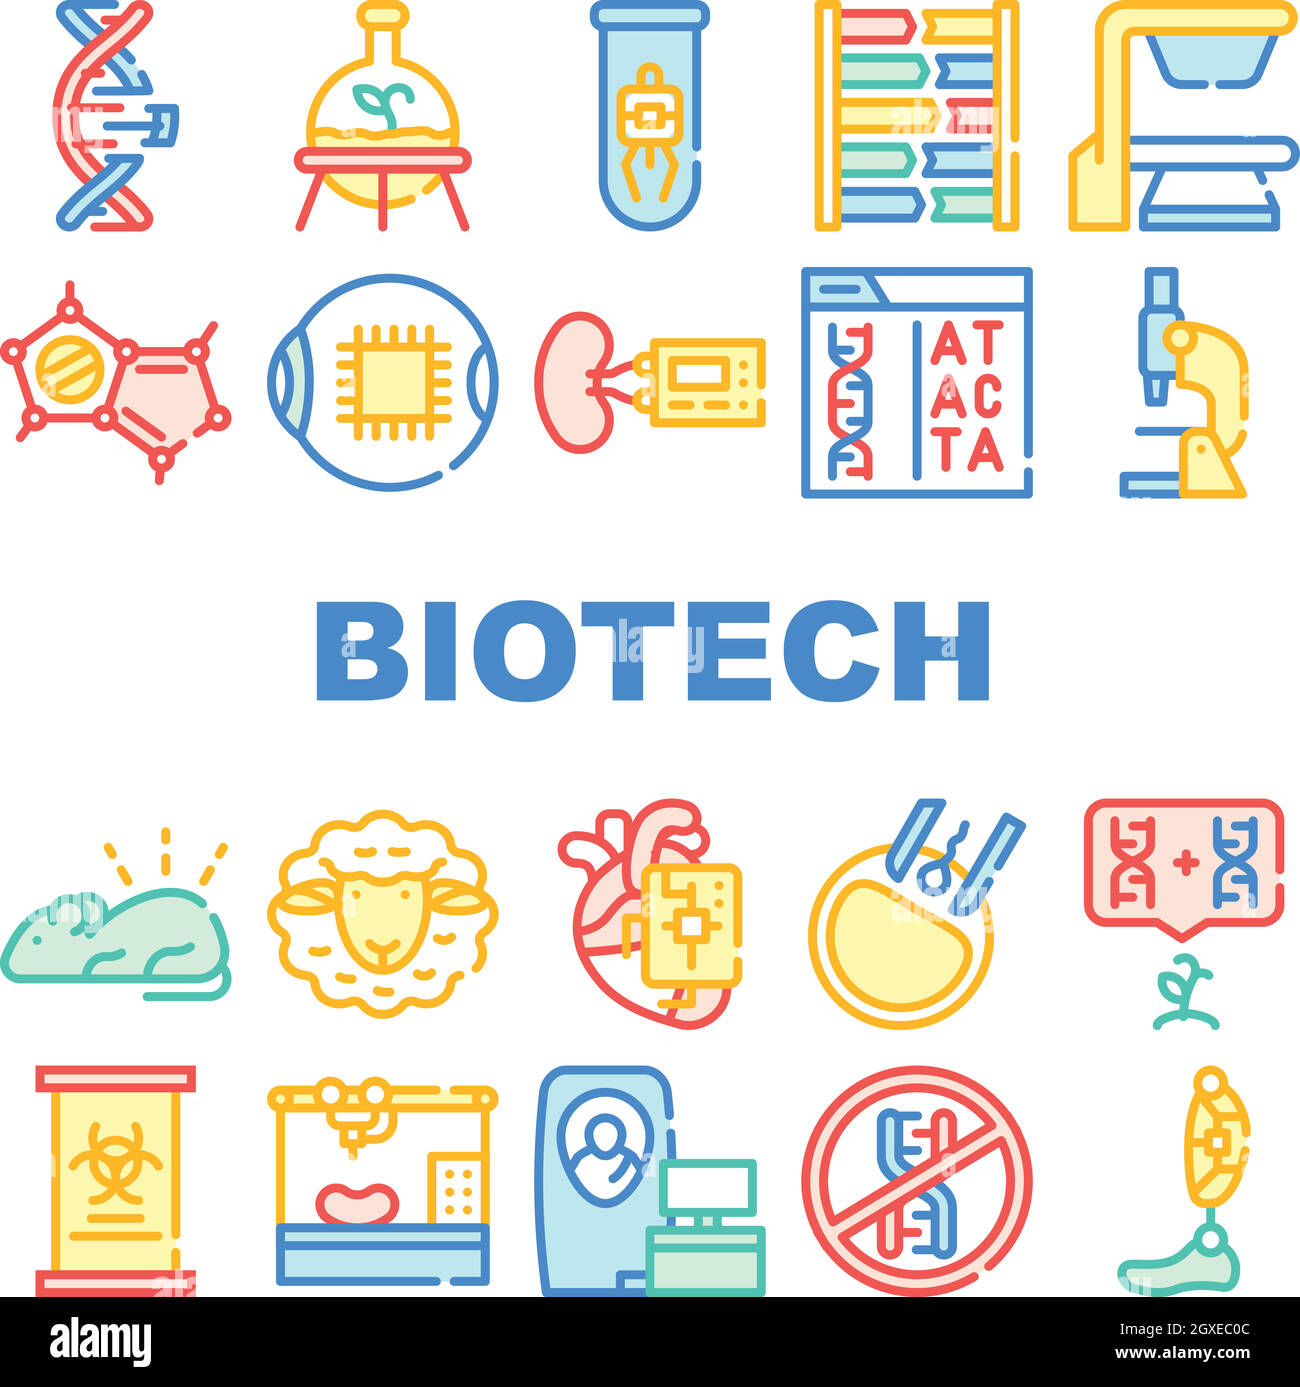 Biotech Technology Collection Icons Set Vector Illustrations Stock Vector